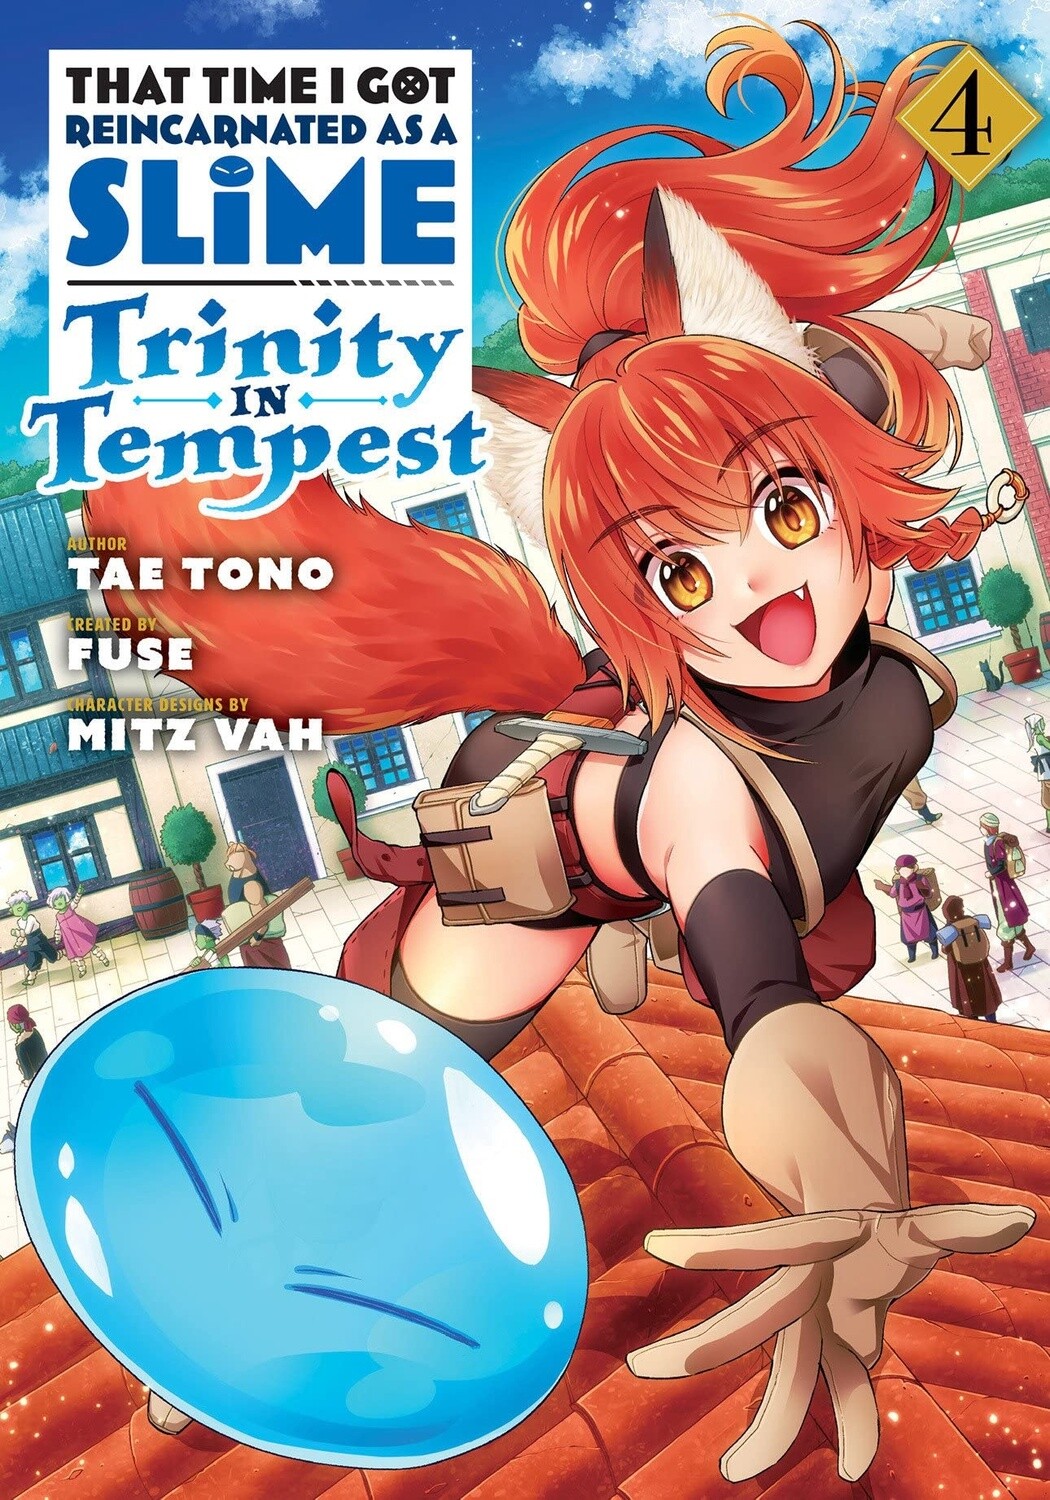 That Time I Got Reincarnated as a Slime: Trinity in Tempest Vol. 4